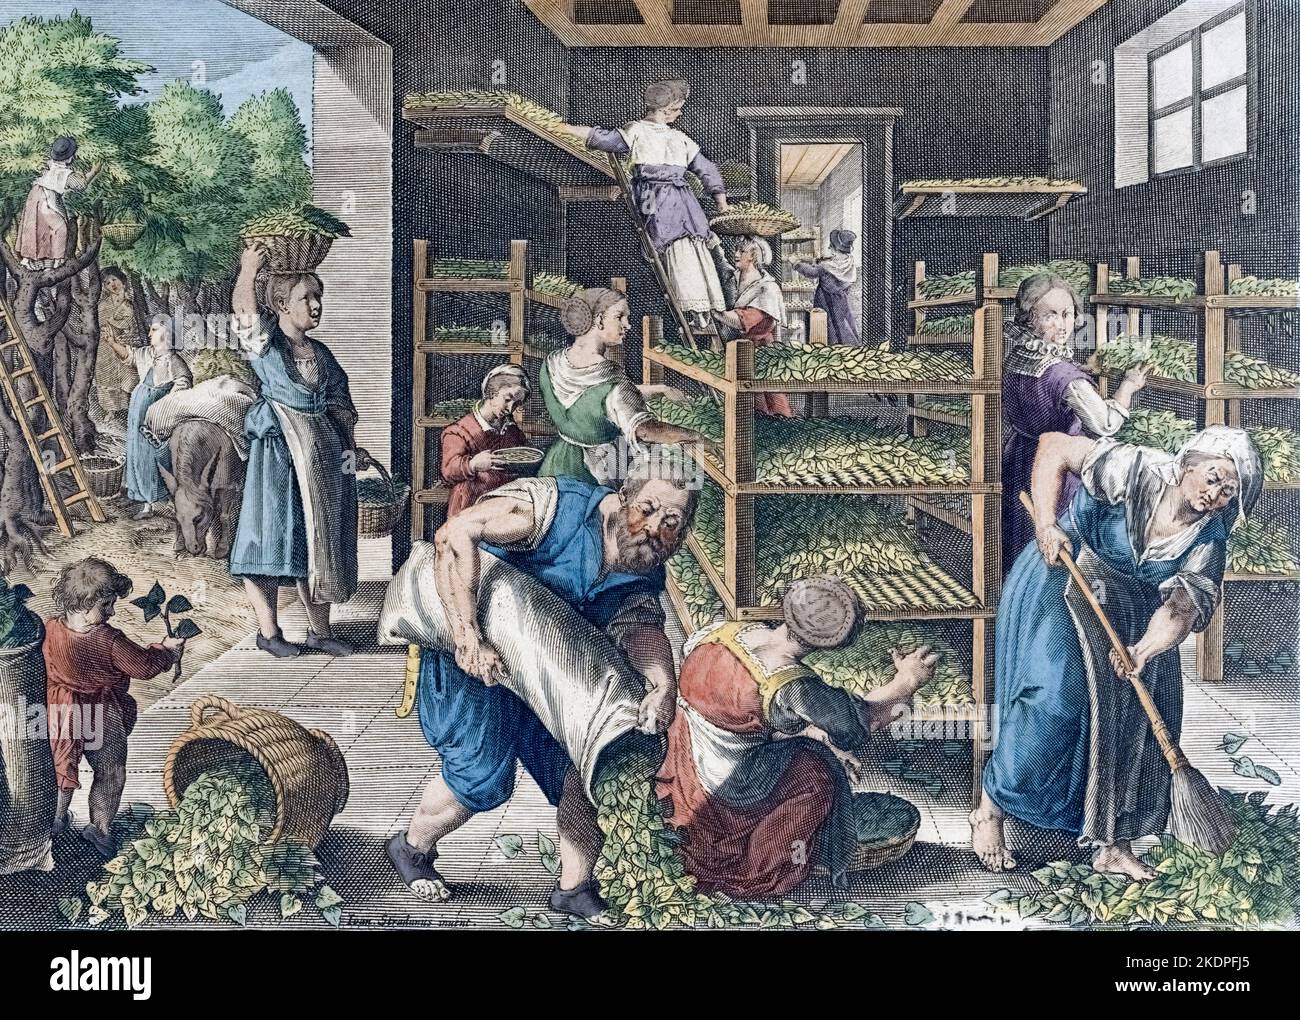 Silk production in Europe in the 16th century.  Gathering mulberry leaves and feeding the silkworms.  From Vermis Sericus, a series of engravings by Karel van Mallery after a work by Jan van der Straet, known as Stradanus. Stock Photo